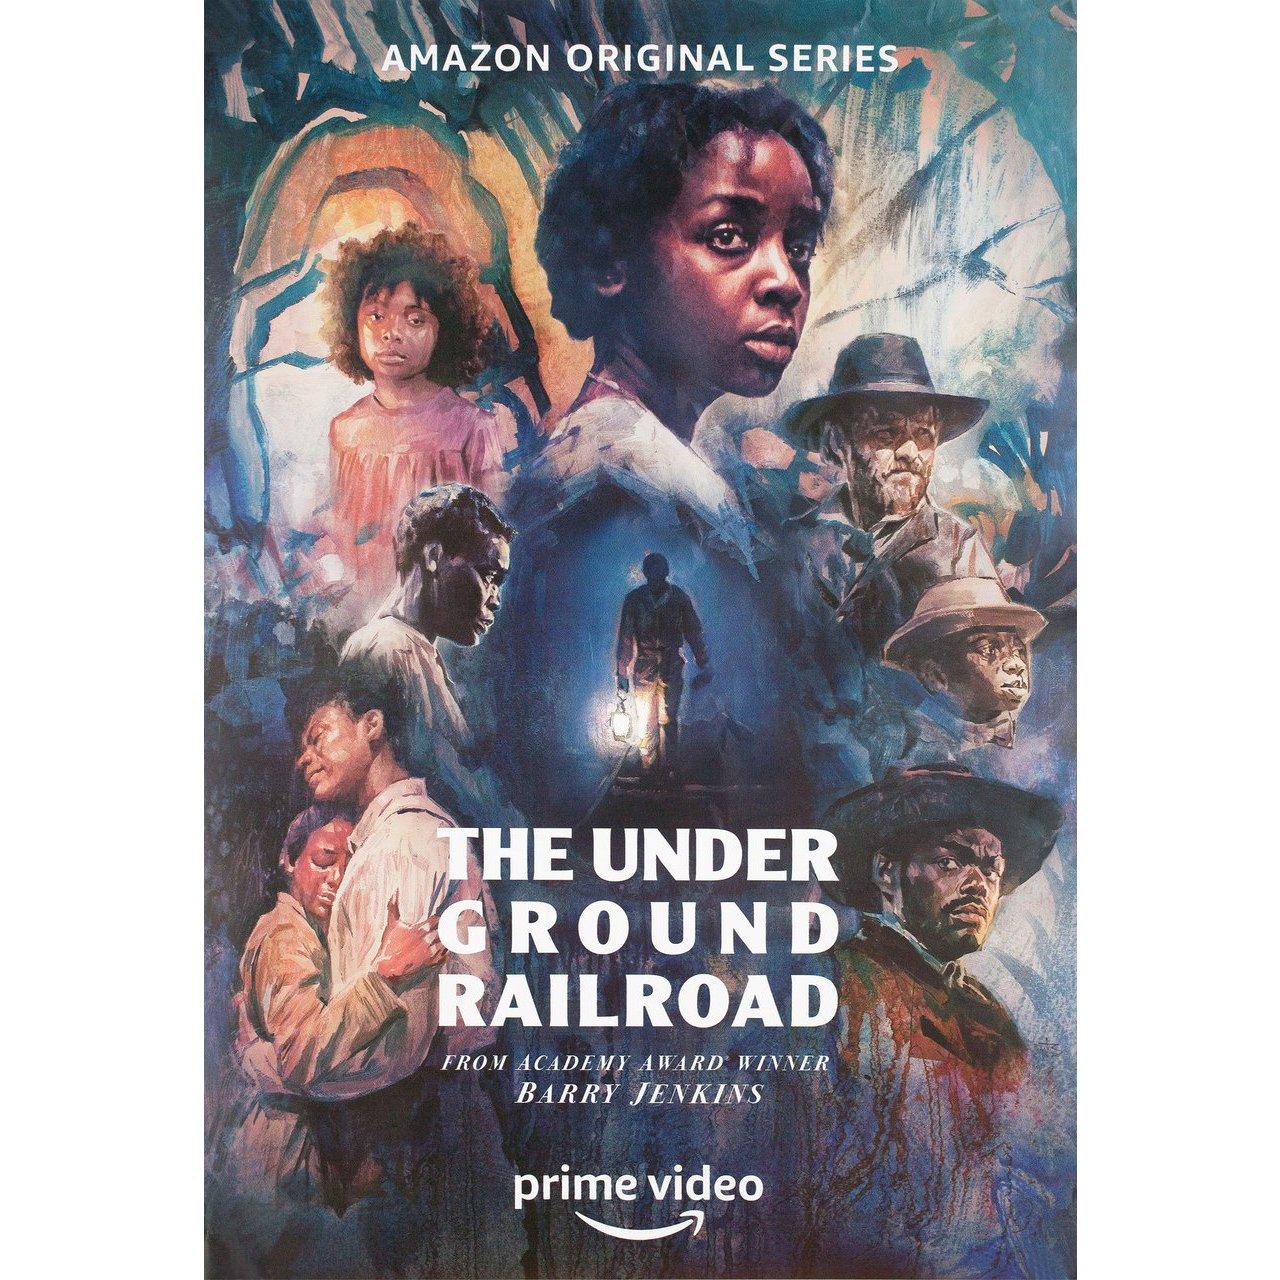 Original 2021 U.S. one sheet poster by Tony Stella / Midnight Marauder for The Underground Railroad (2021). Very Good-Fine condition, rolled. Please note: the size is stated in inches and the actual size can vary by an inch or more.